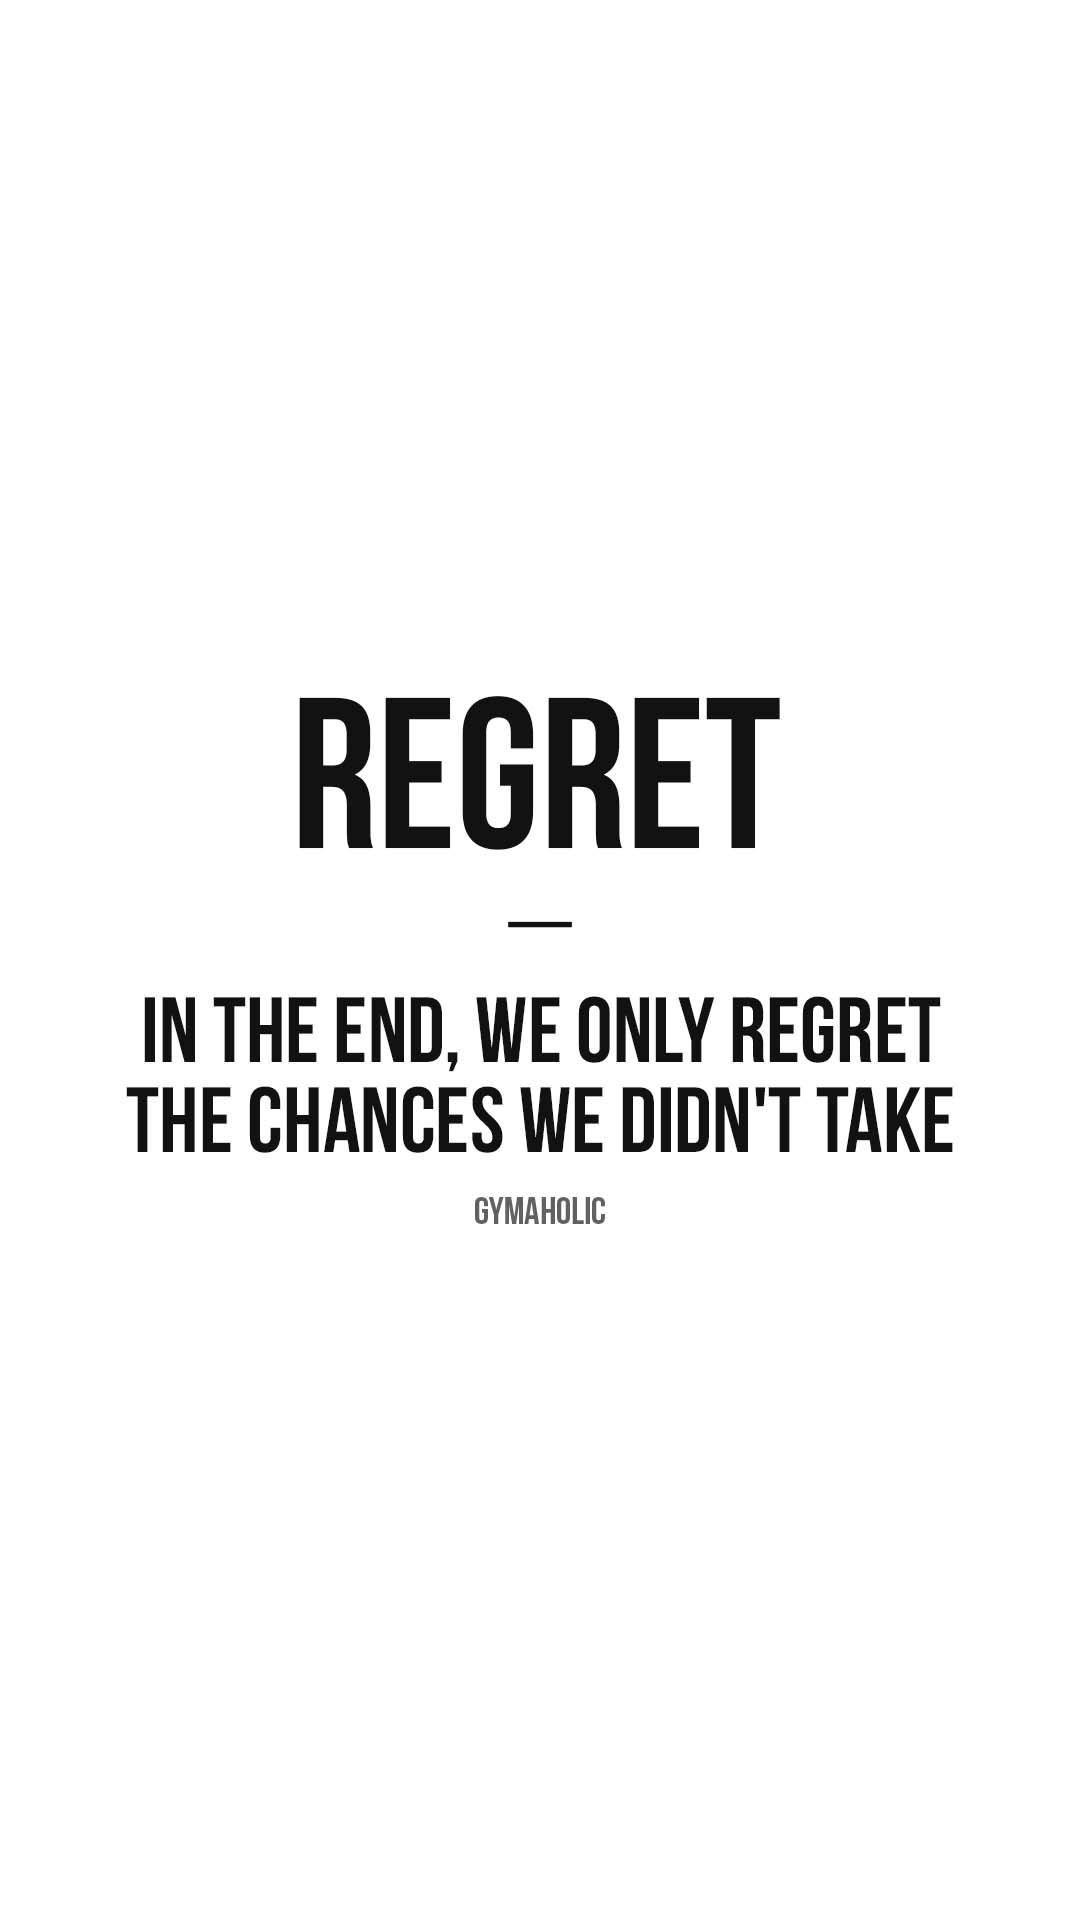 Regret: in the end, we only regret the chances we didn’t take